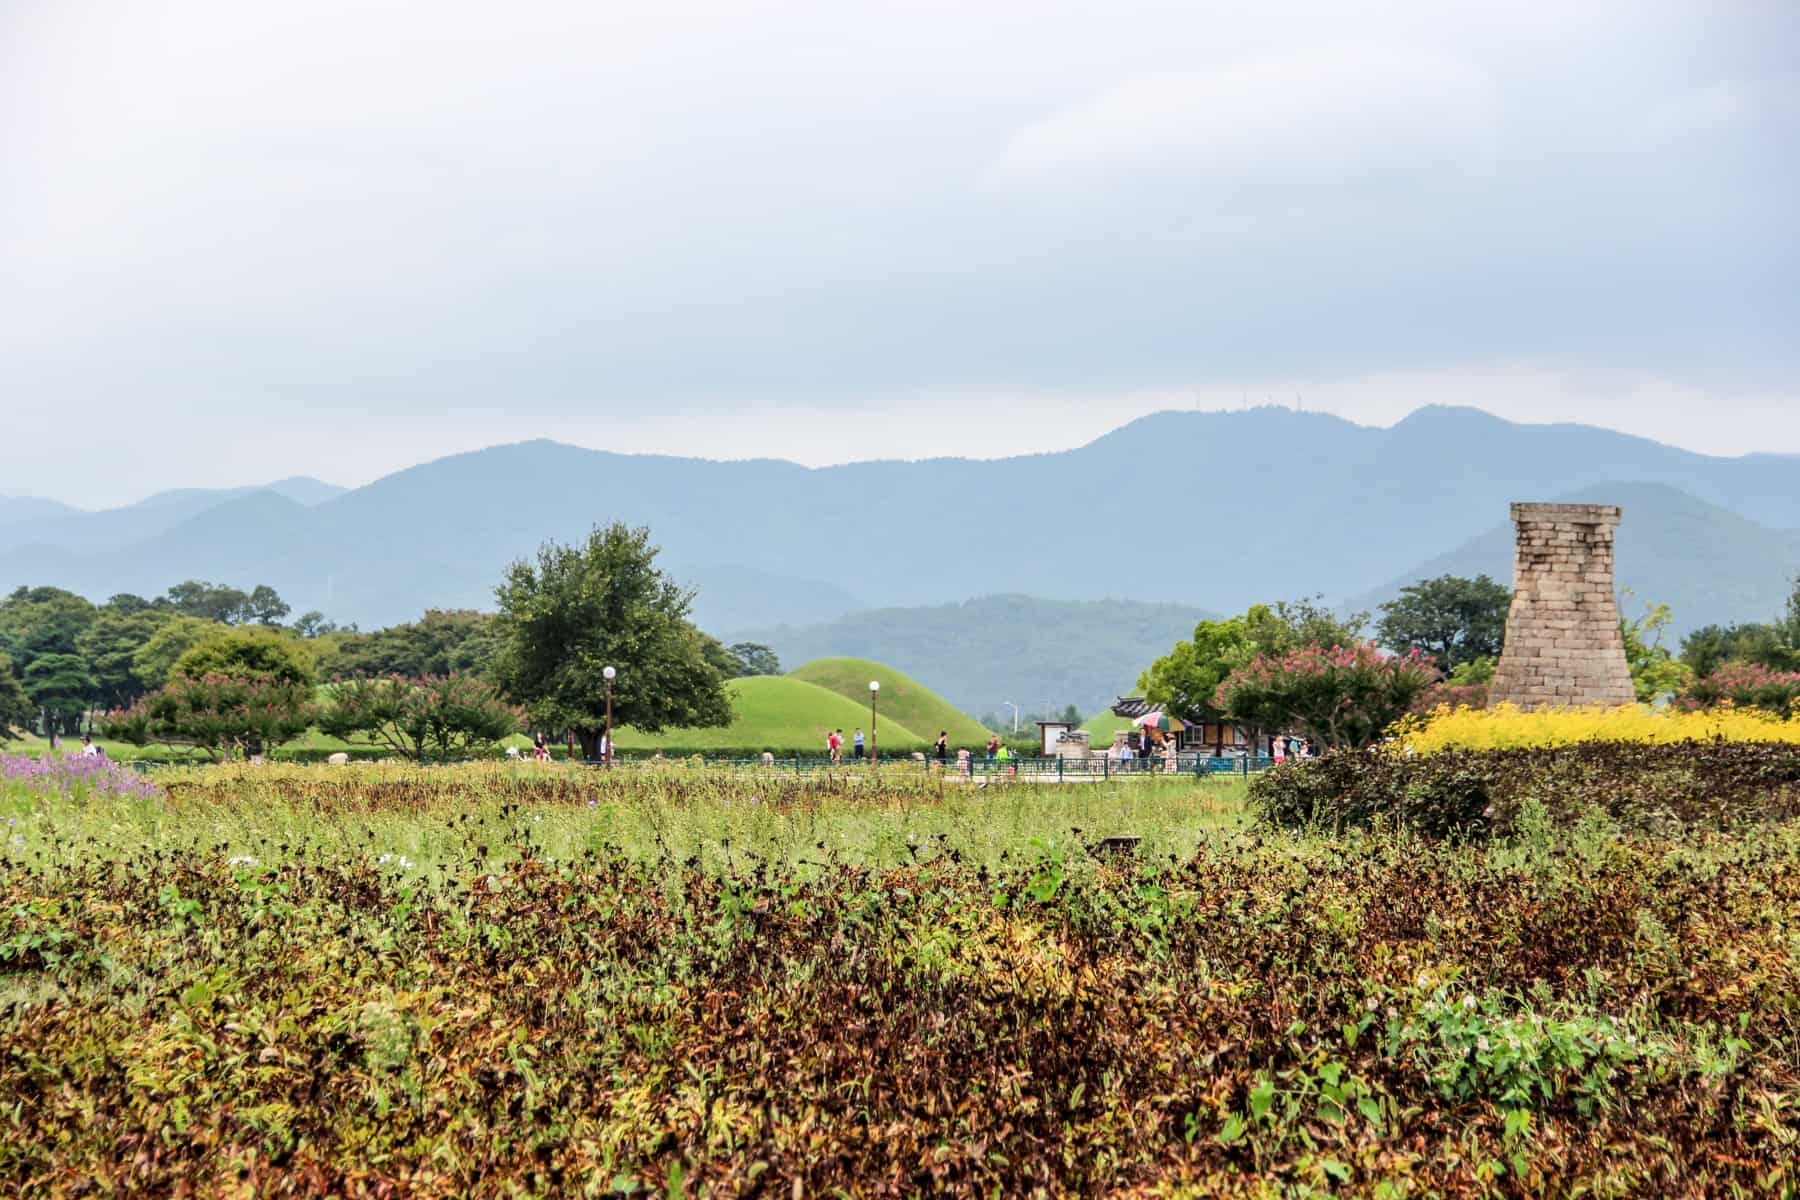 The grassy royal burial mounds in Gyeongju South Korea to a backdrop of mountains.